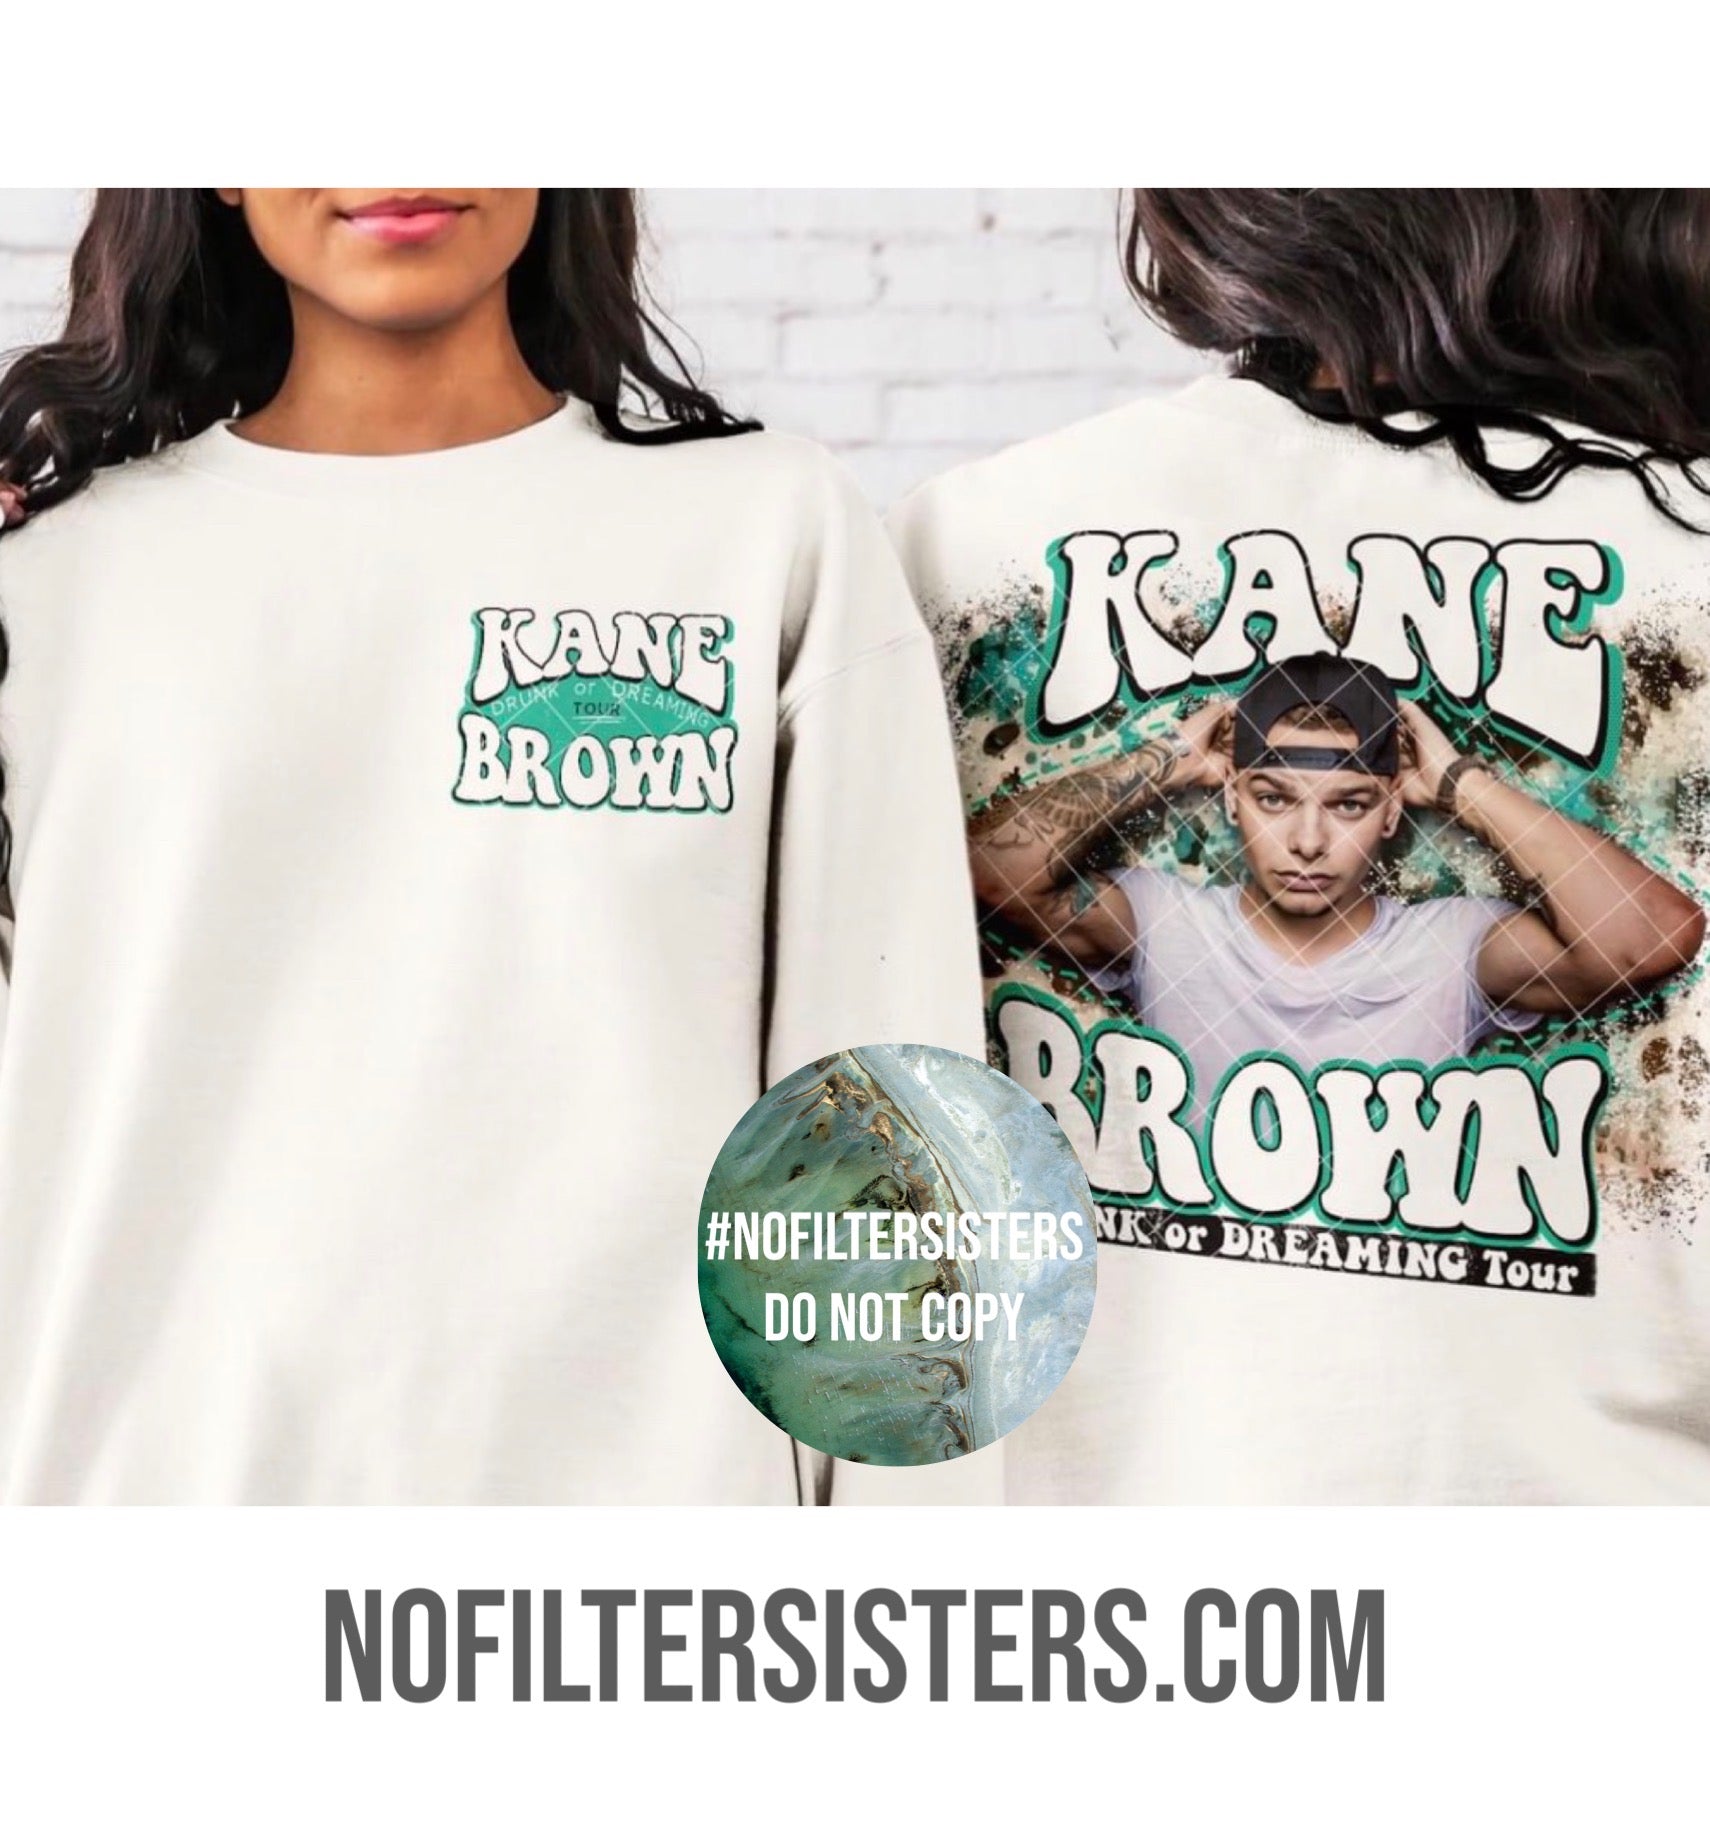 Kane Brown Tour Graphic Tee Starting at $26.95 add $6 if want crewneck sweater. Please allow 3-4 business days. Available in sizes Small - 4XL